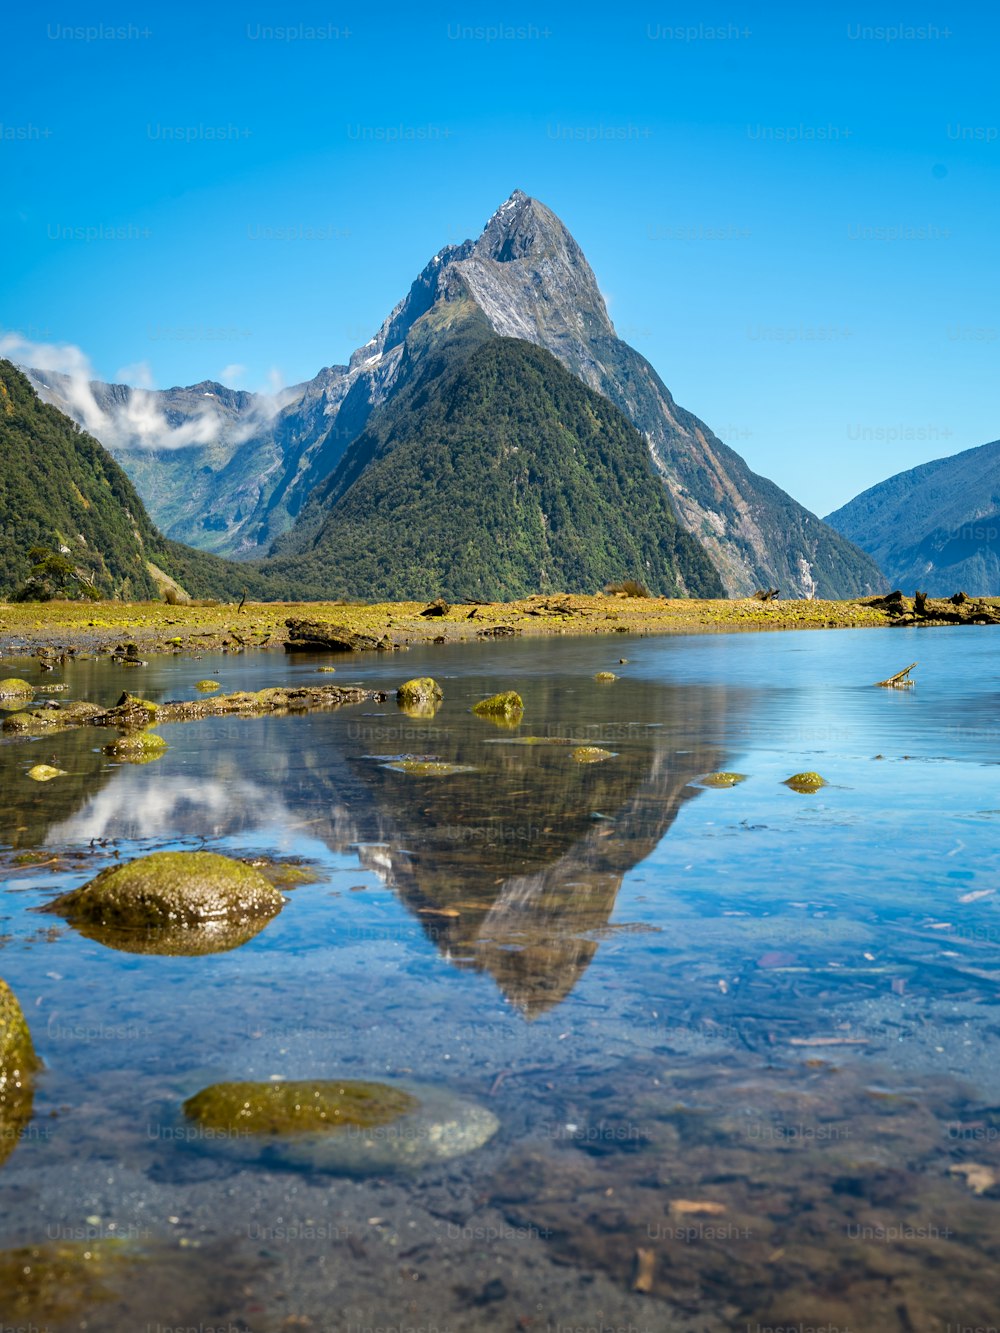 Milford Sound, New Zealand. - Mitre Peak is the iconic landmark of Milford Sound in Fiordland National Park, South Island of New Zealand, the most spectacular natural attraction in New Zealand.